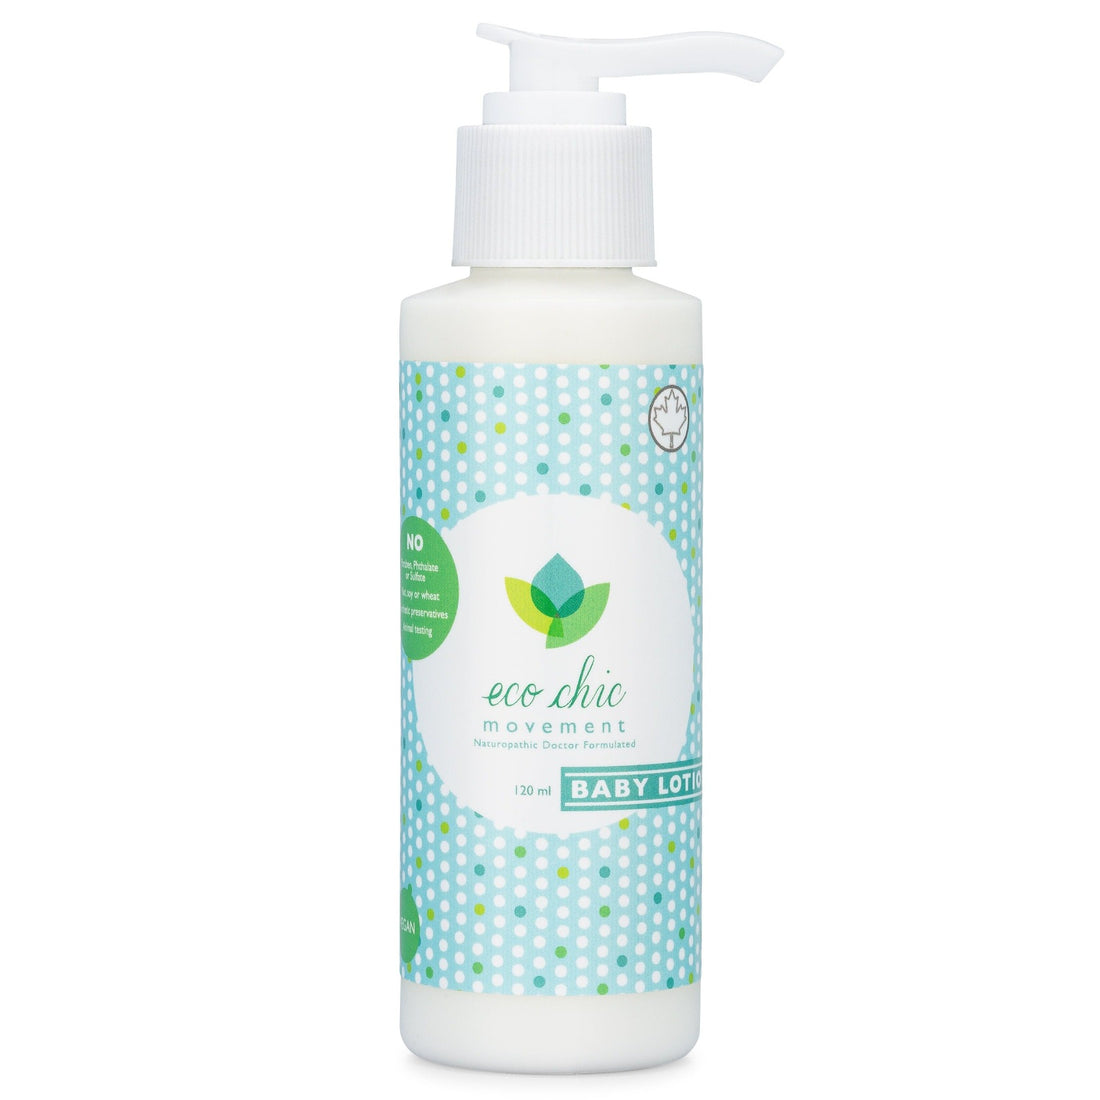 Best natural baby lotion for sensitive skin 